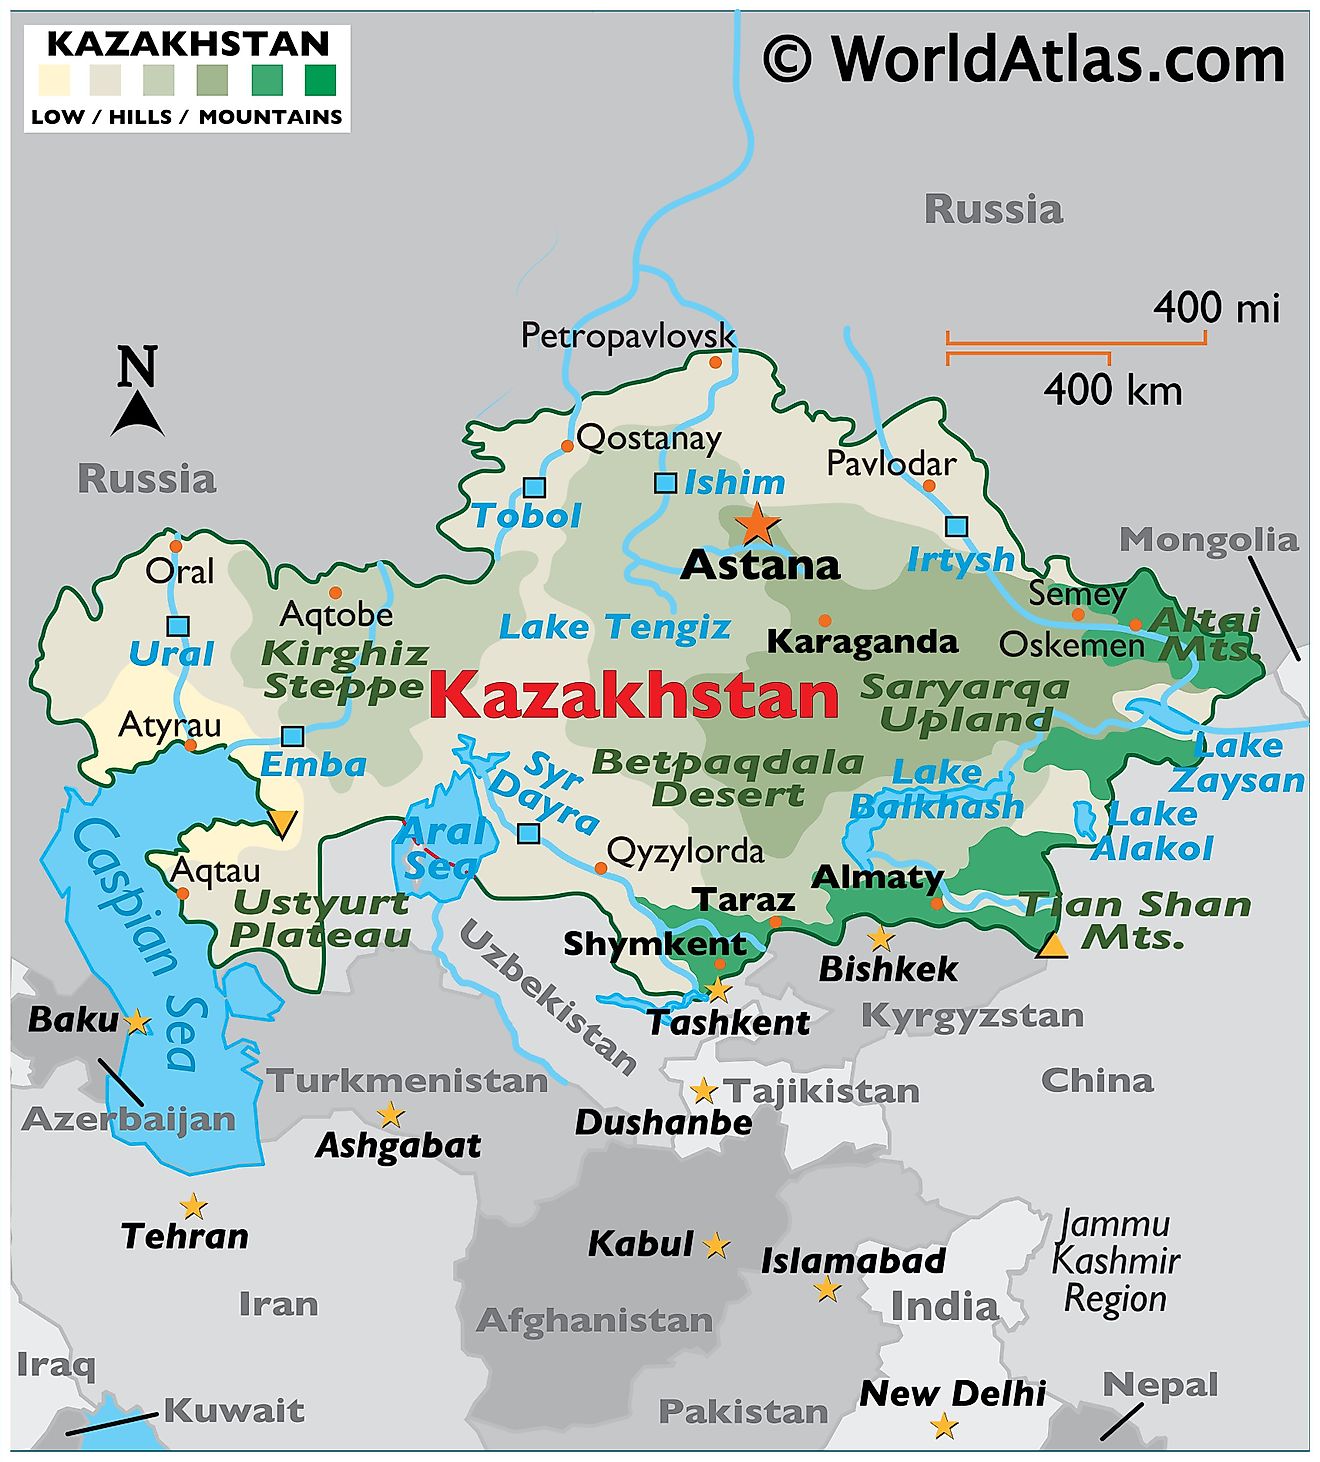 Physical Map of Kazakhstan showing relief, mountains, highest point and lowest points, major lakes, rivers, important urban centres, etc.